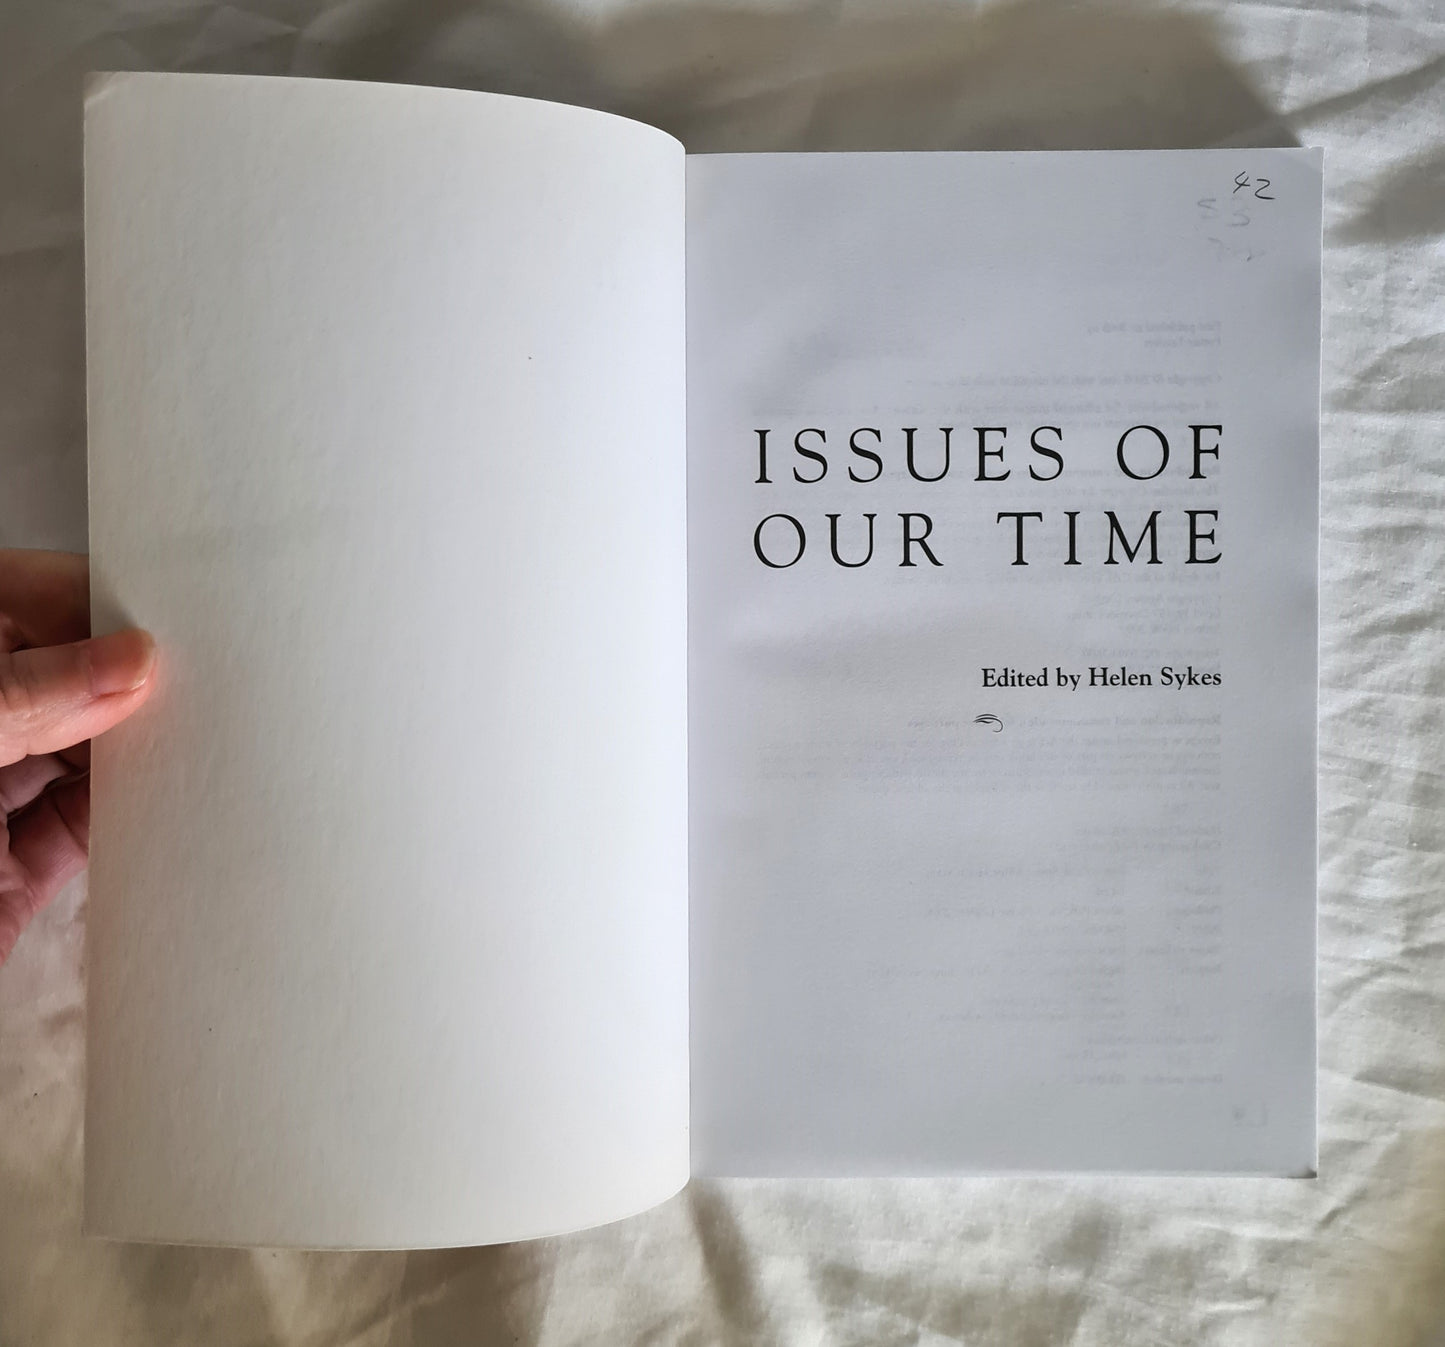 Issues of Our Time by Helen Sykes